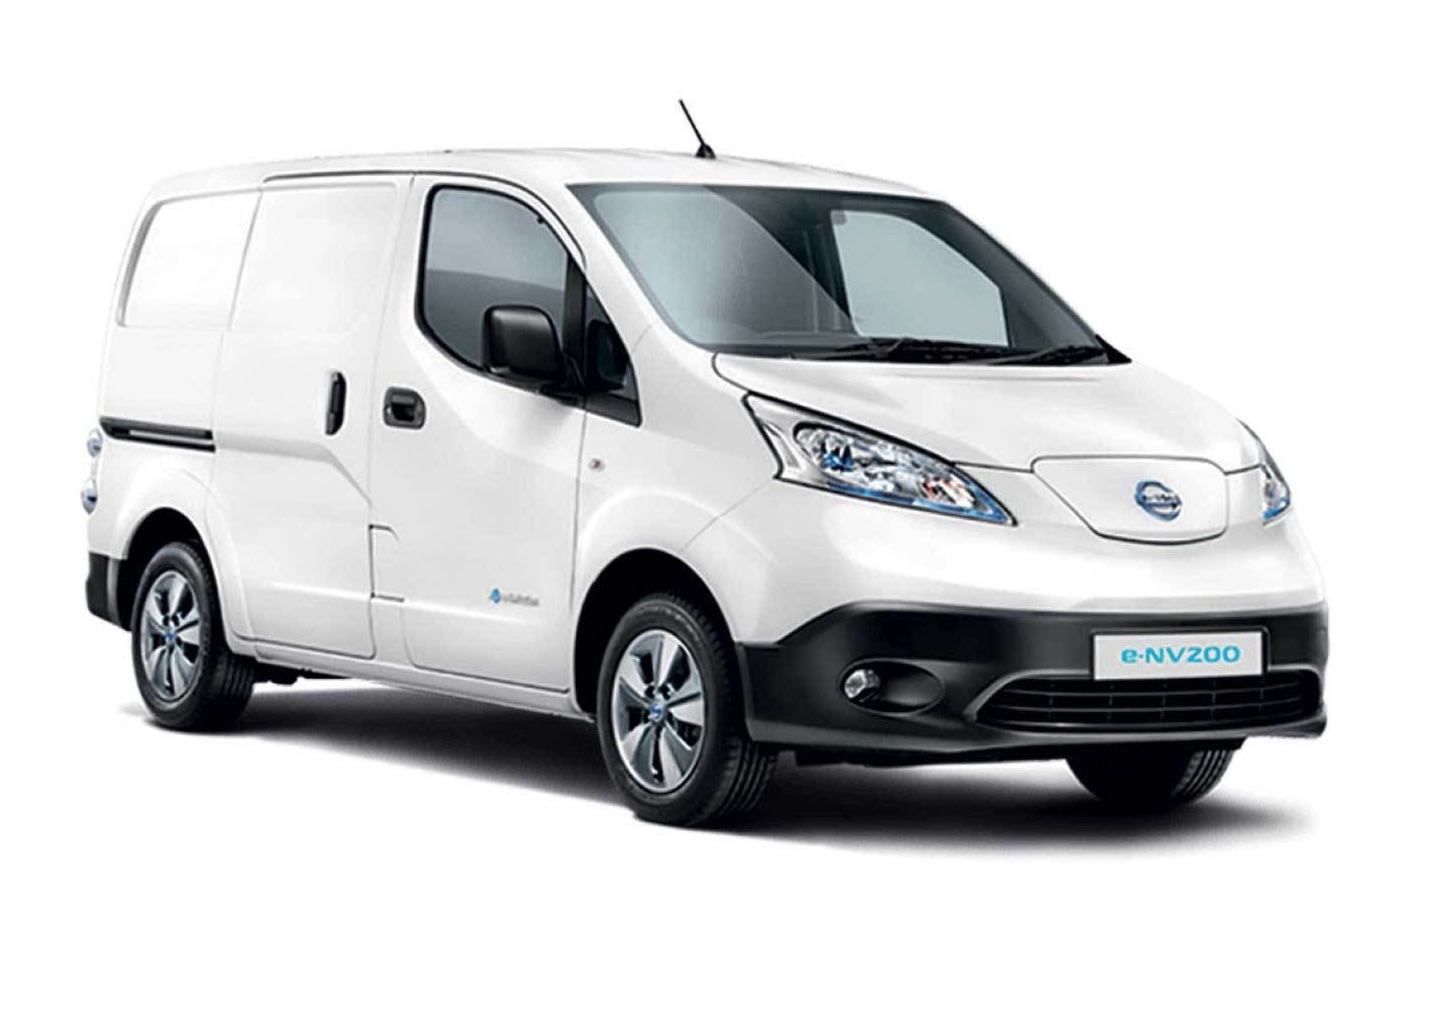 Charging your Nissan e-NV200